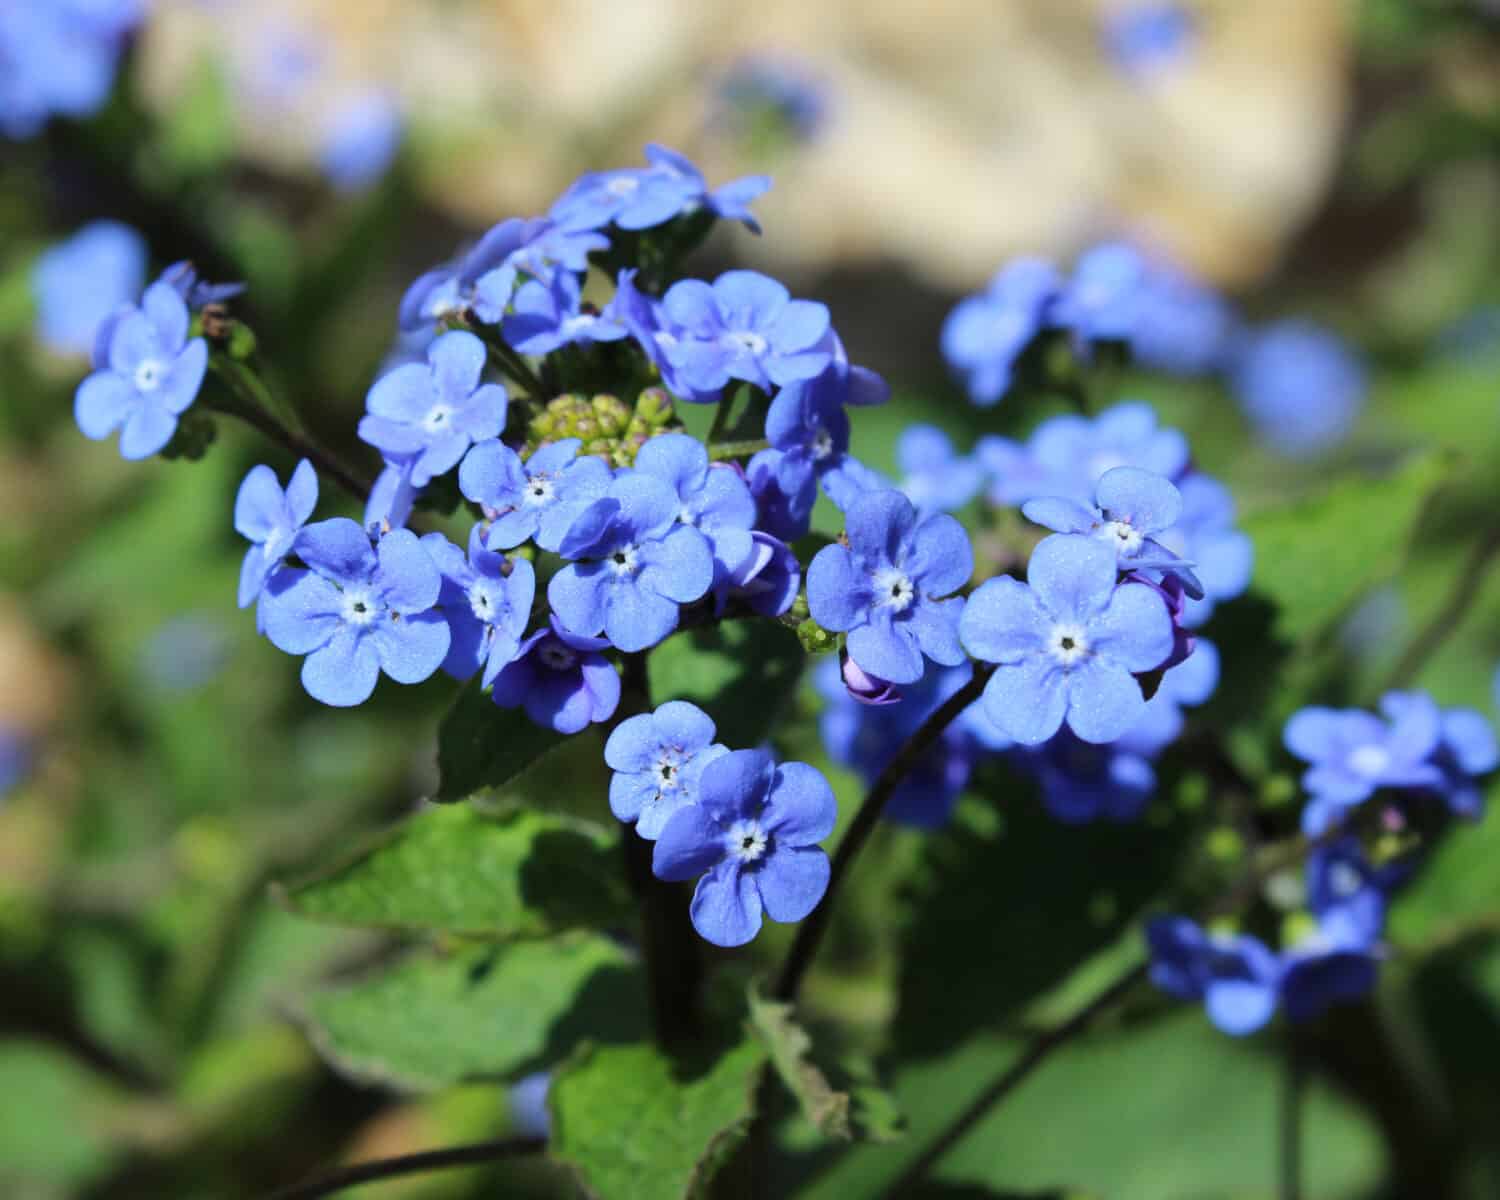 The bright blue flowers of Brunnera macrophylla also known as Siberian Bugloss, Great Forget-me-not, or Heartleaf.